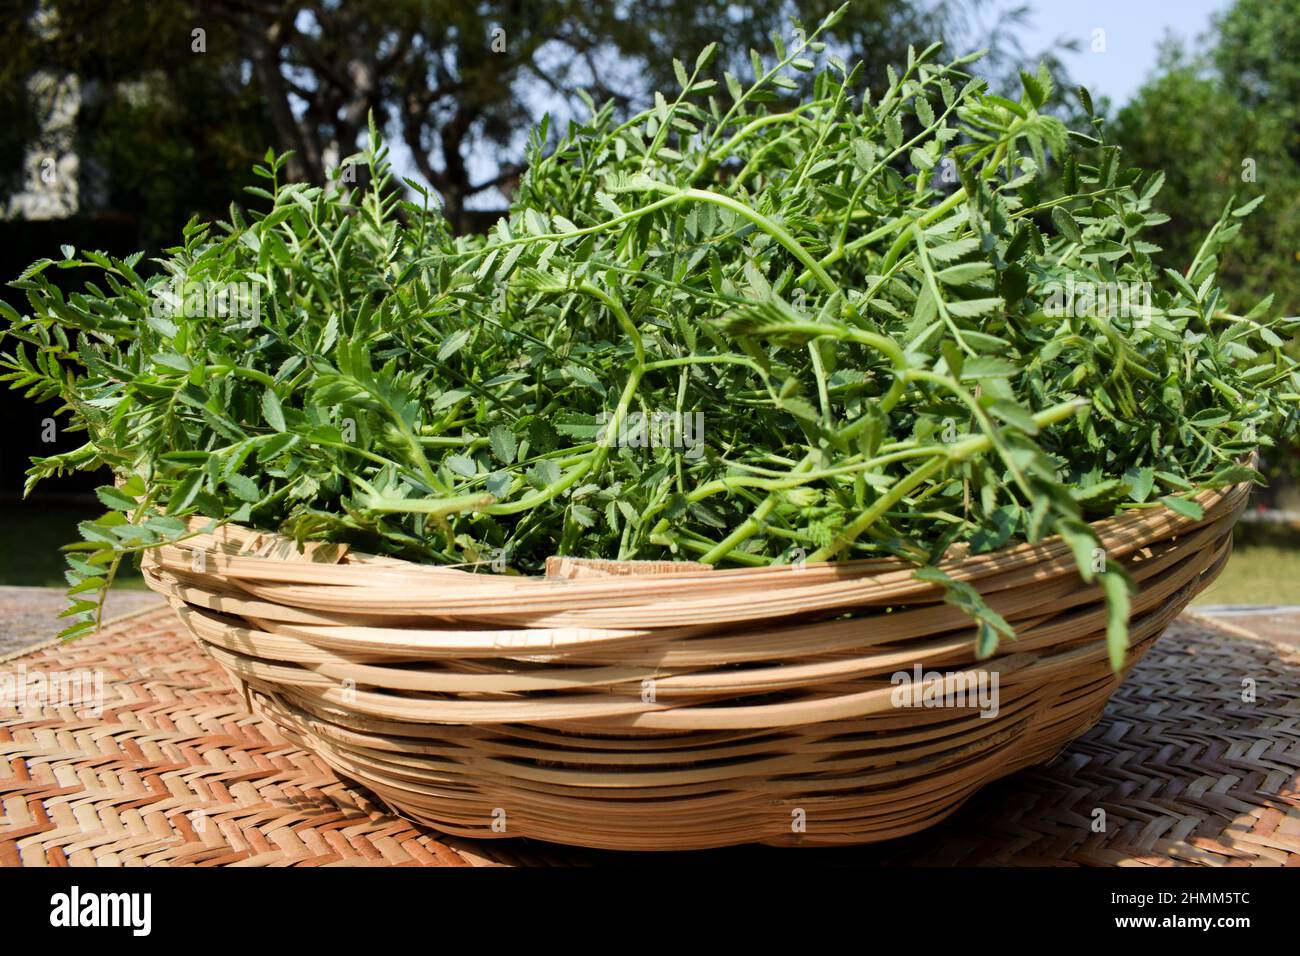 Green leafy Chickpea vegetable leaves. Tender chana chick pea or Bengal gram legume leaves in wicker bamboo basket sold in market outside in farm Stock Photo